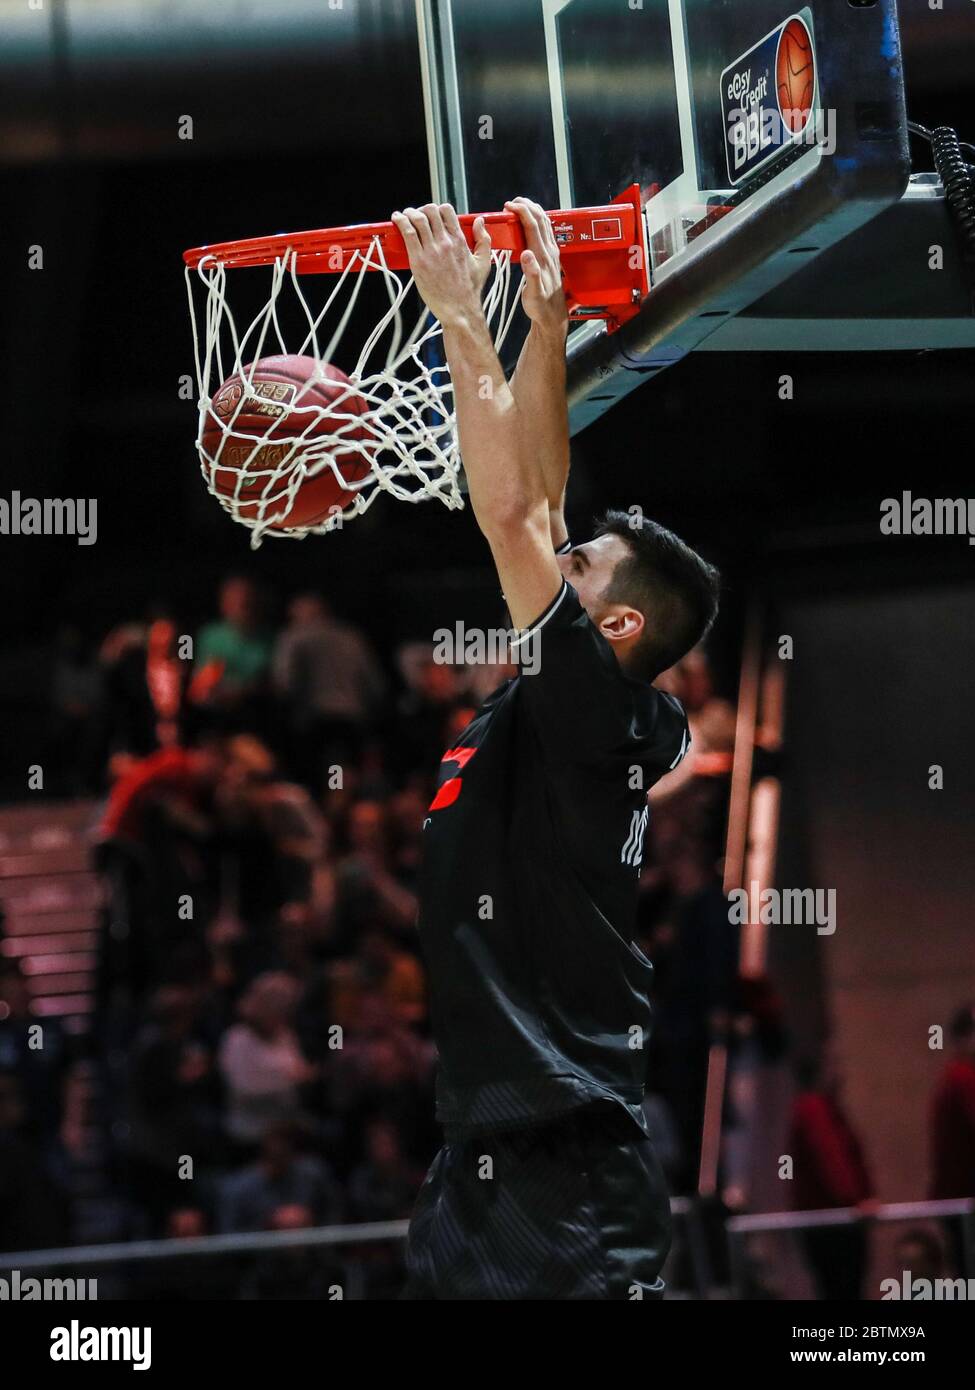 Braunschweig, Germany, December 27, 2019:	Sebastian Herrera in action during the warmup session before the Basketball BBL Bundesliga game Stock Photo